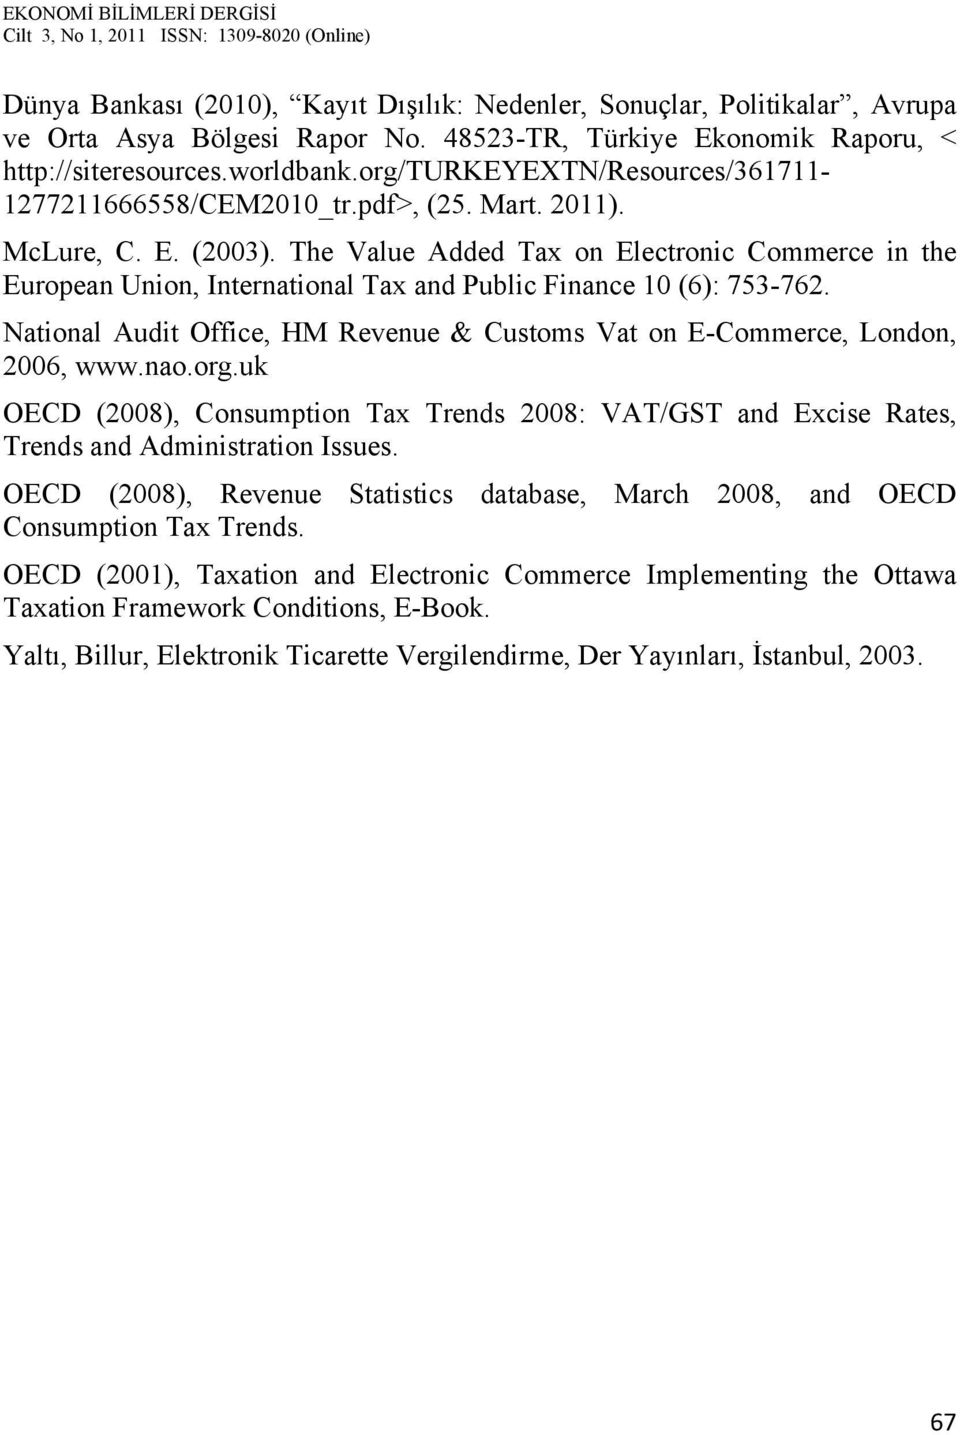 The Value Added Tax on Electronic Commerce in the European Union, International Tax and Public Finance 10 (6): 753-762.